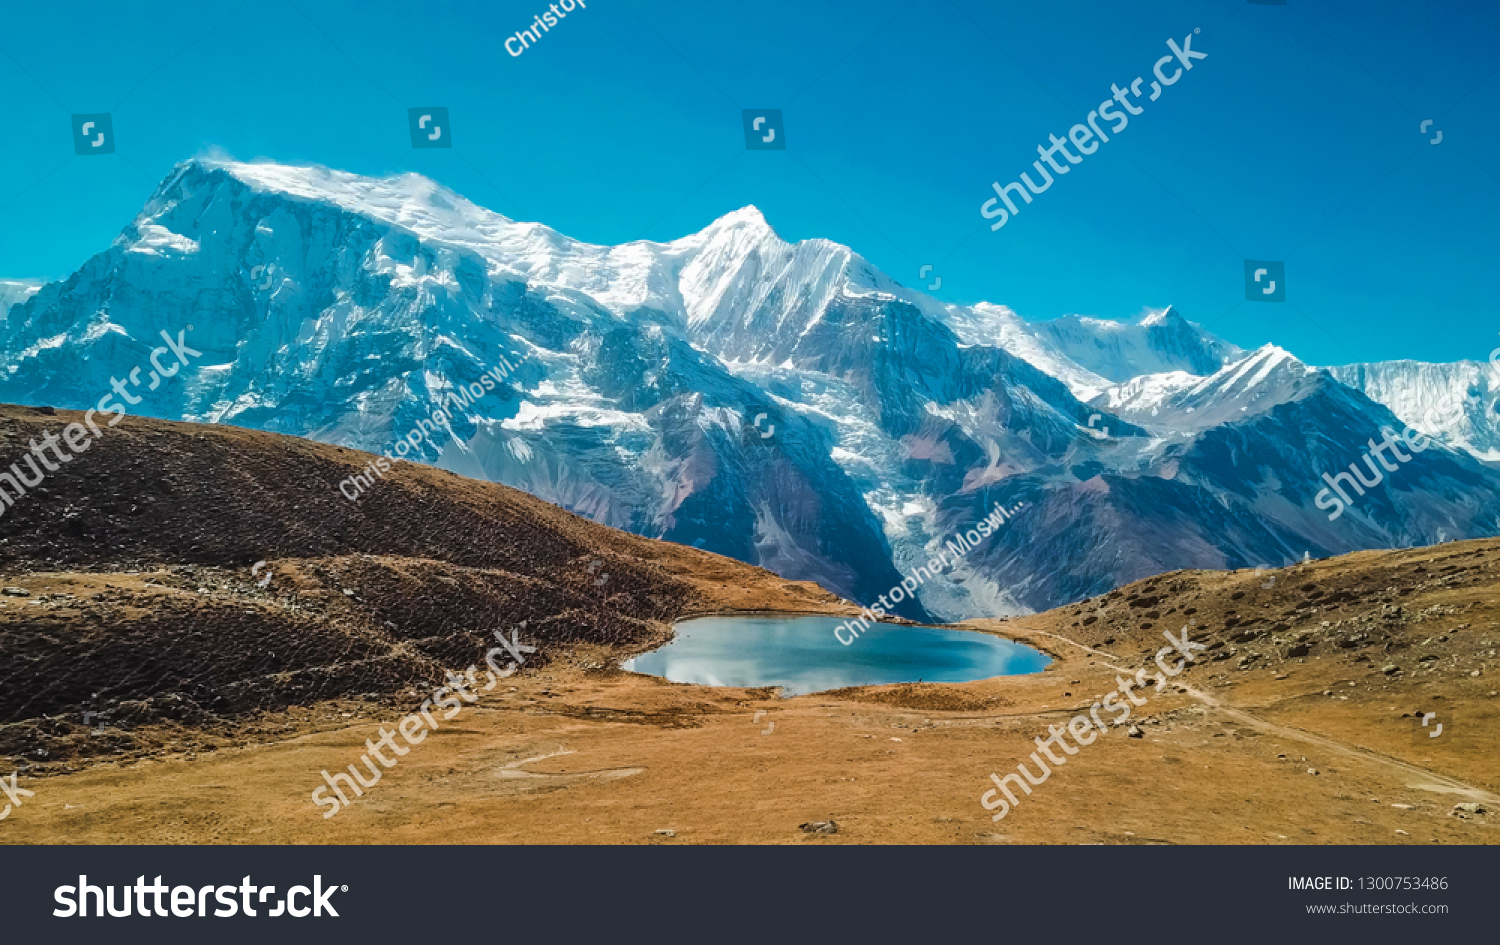 Ice lake, as part of the Annapurna Circuit Trek detour, Himalayas, Nepal. Annapurna chain in the back, covered with snow. Clear weather, dry grass, snowy peaks. Freedom, solitude, chill and relaxation #1300753486